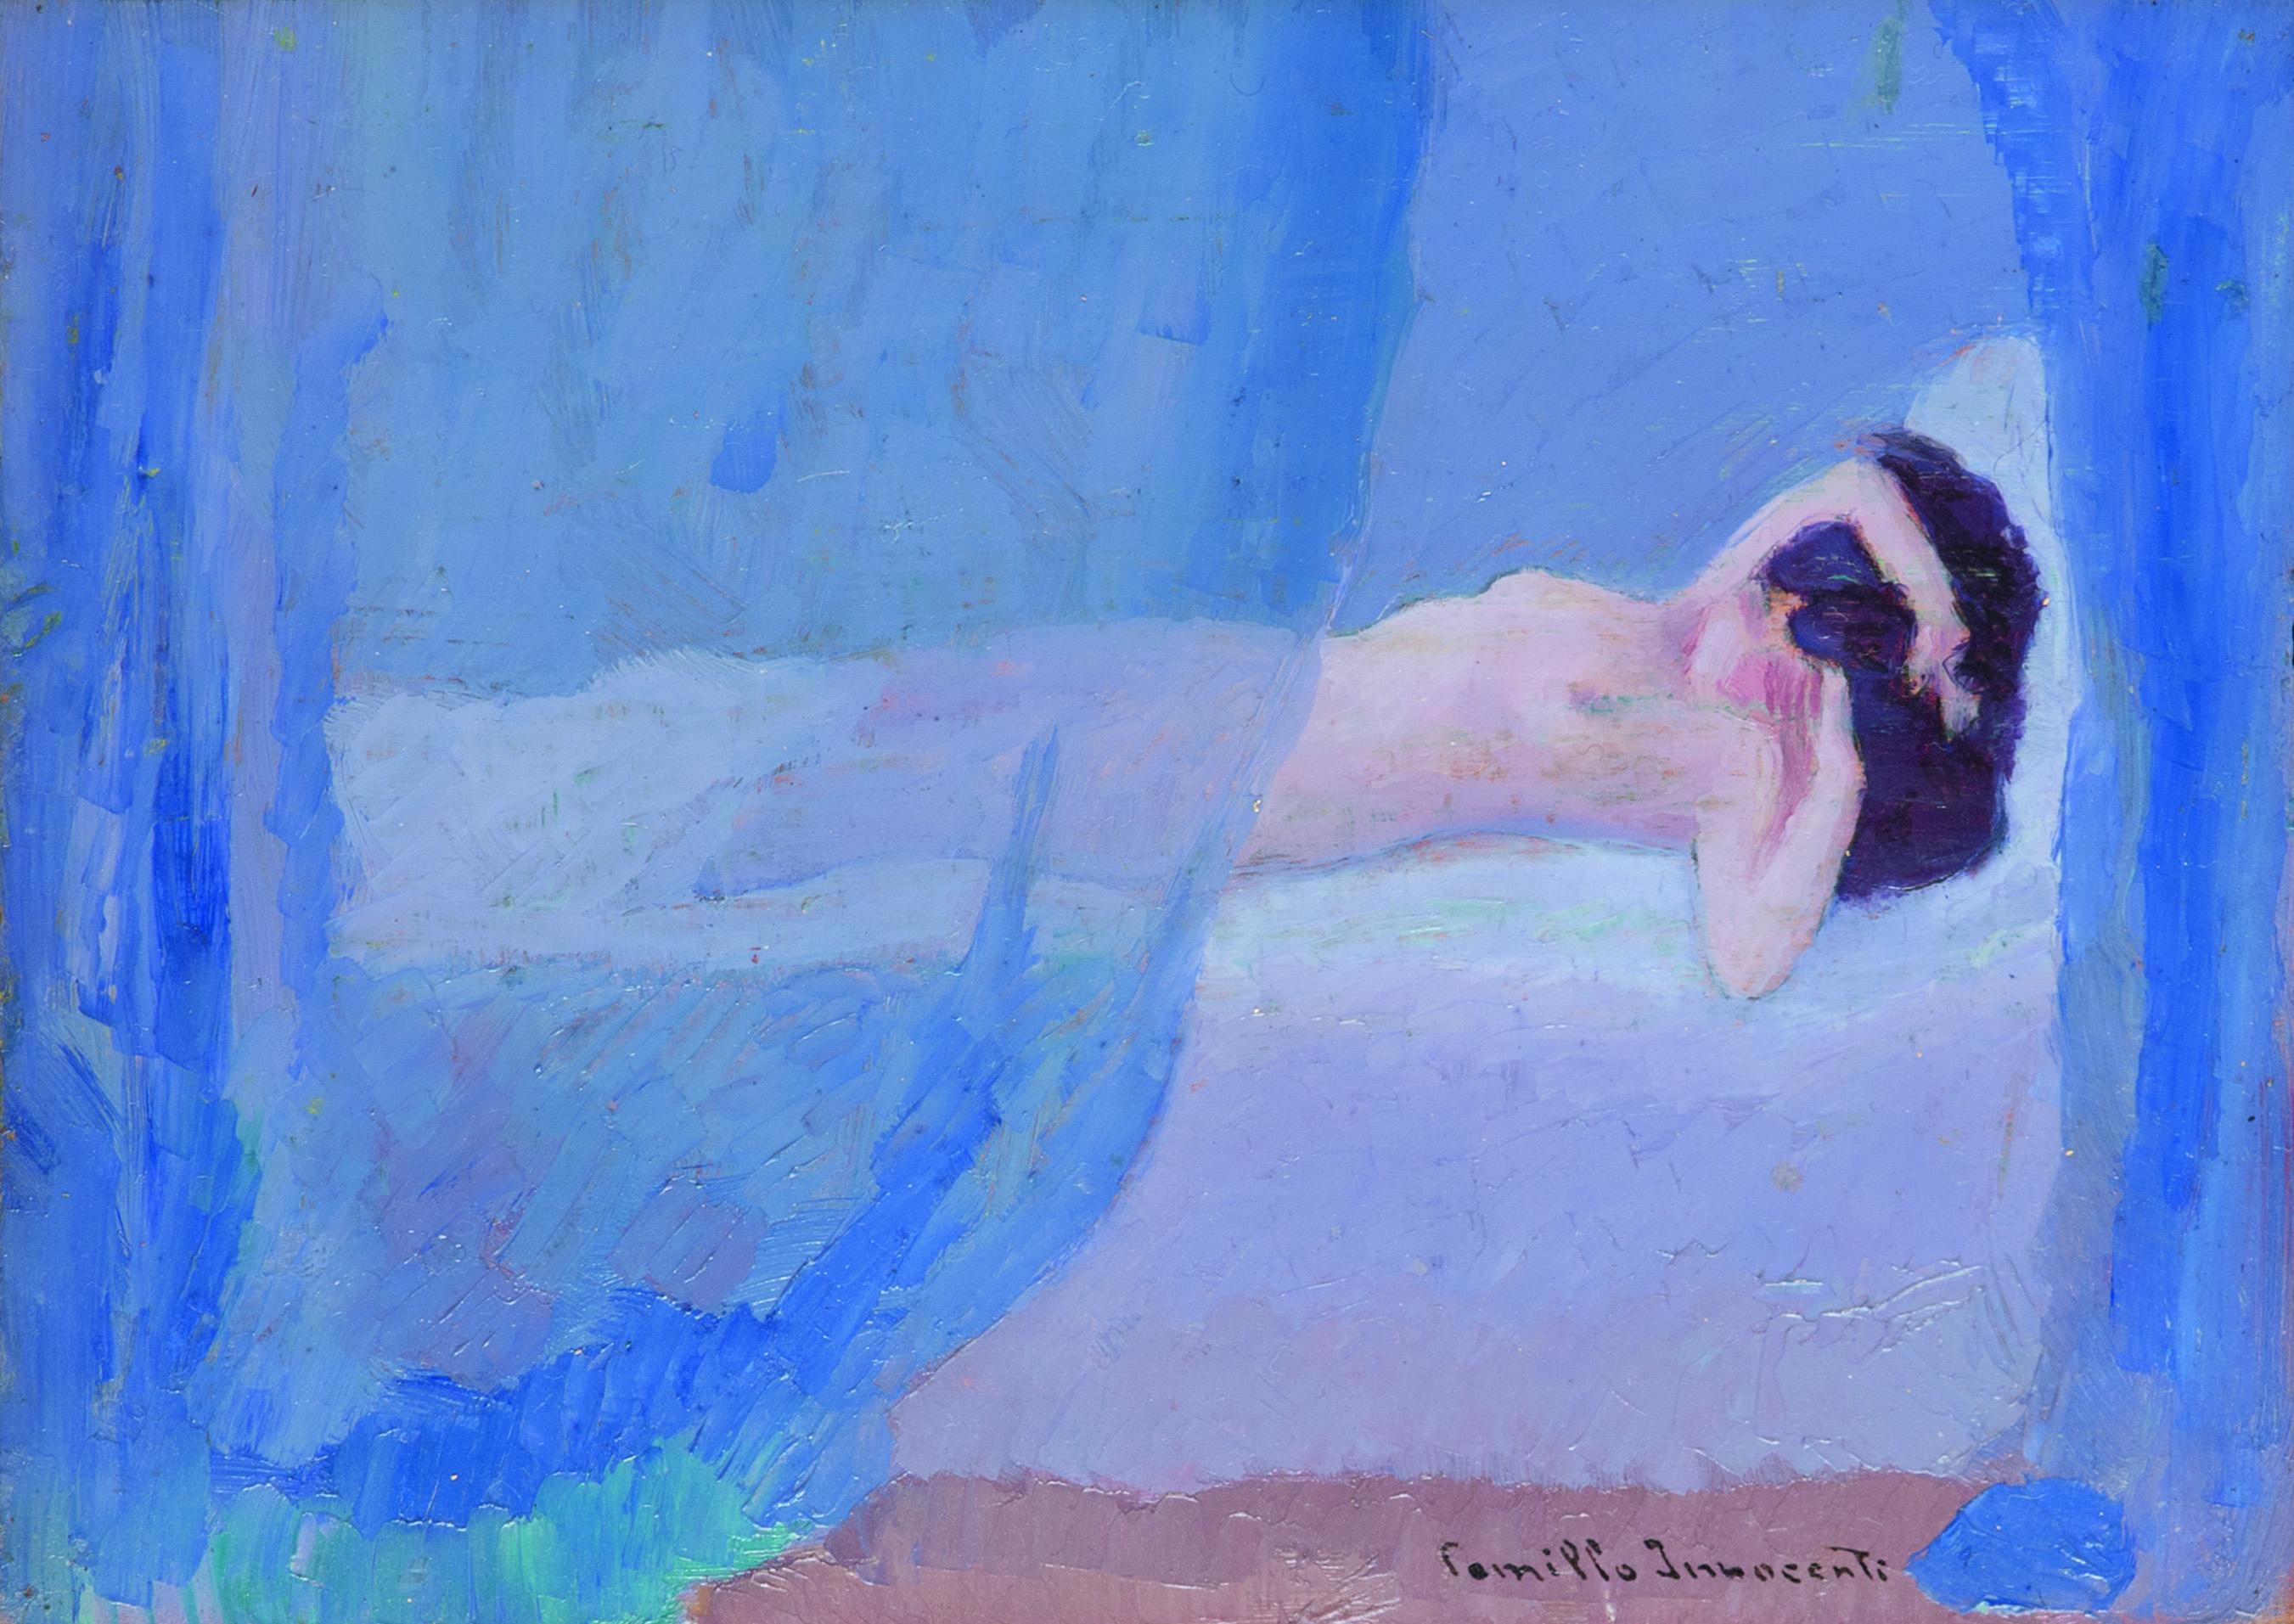 Camillo Innocenti Nude Painting - Female Nude. Sensual portrait in blue of a woman lying on a bed